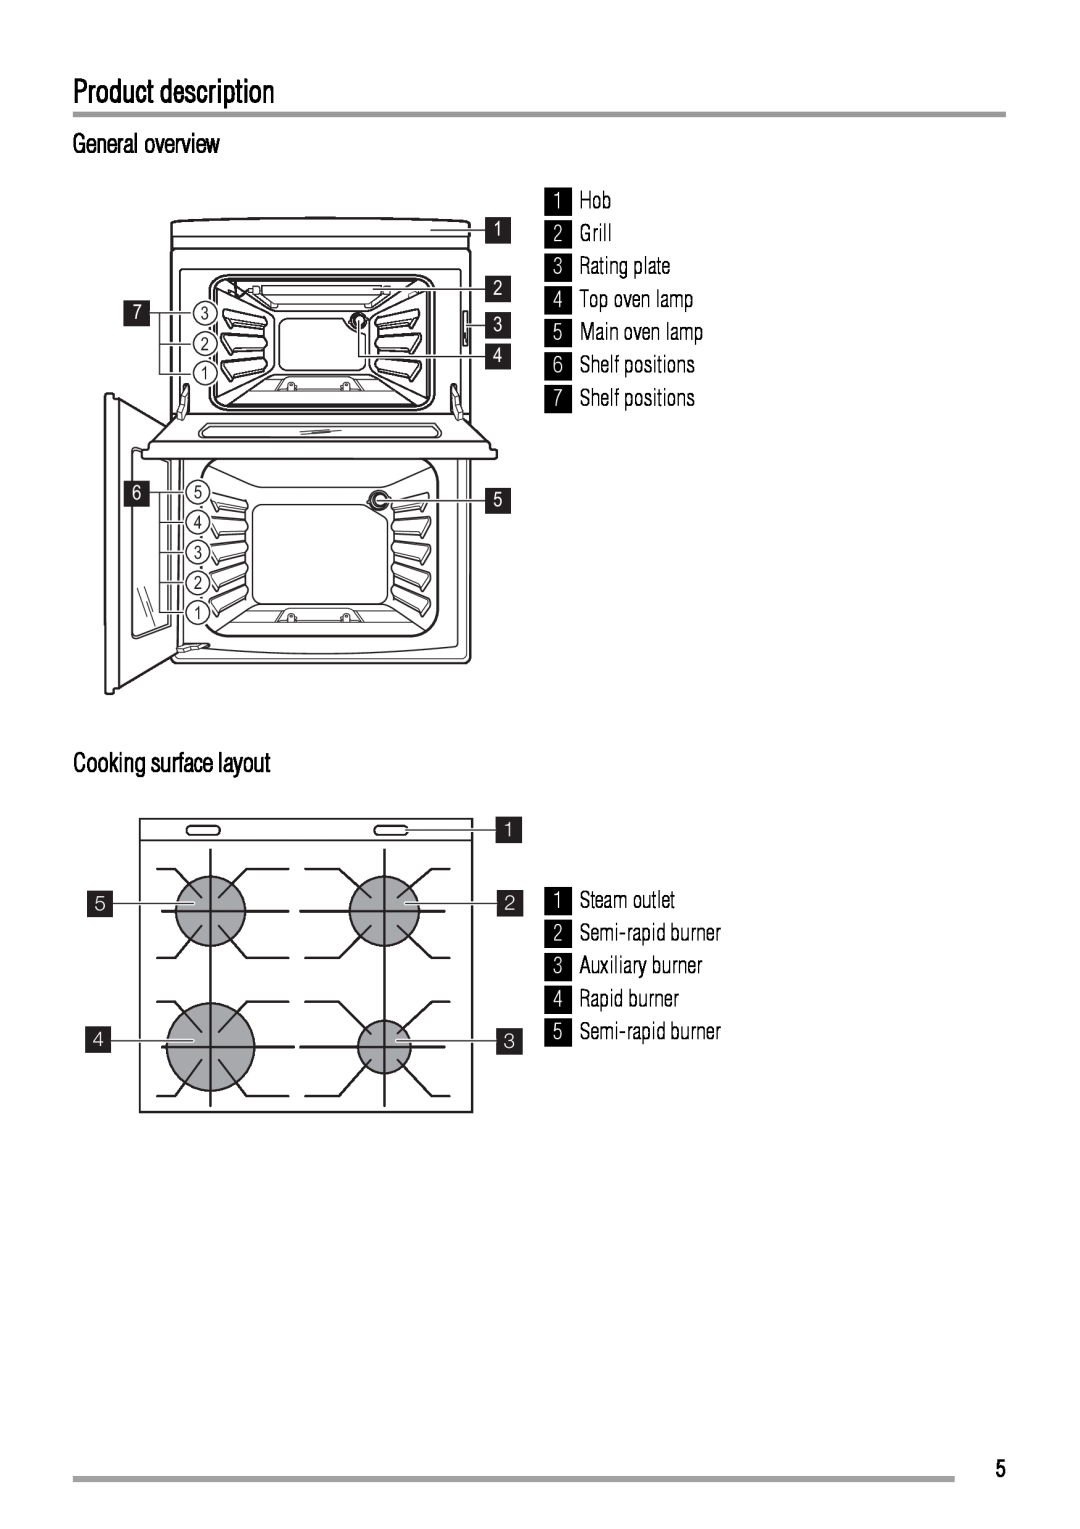 Zanussi ZCG661 manual Product description, General overview, Cooking surface layout 